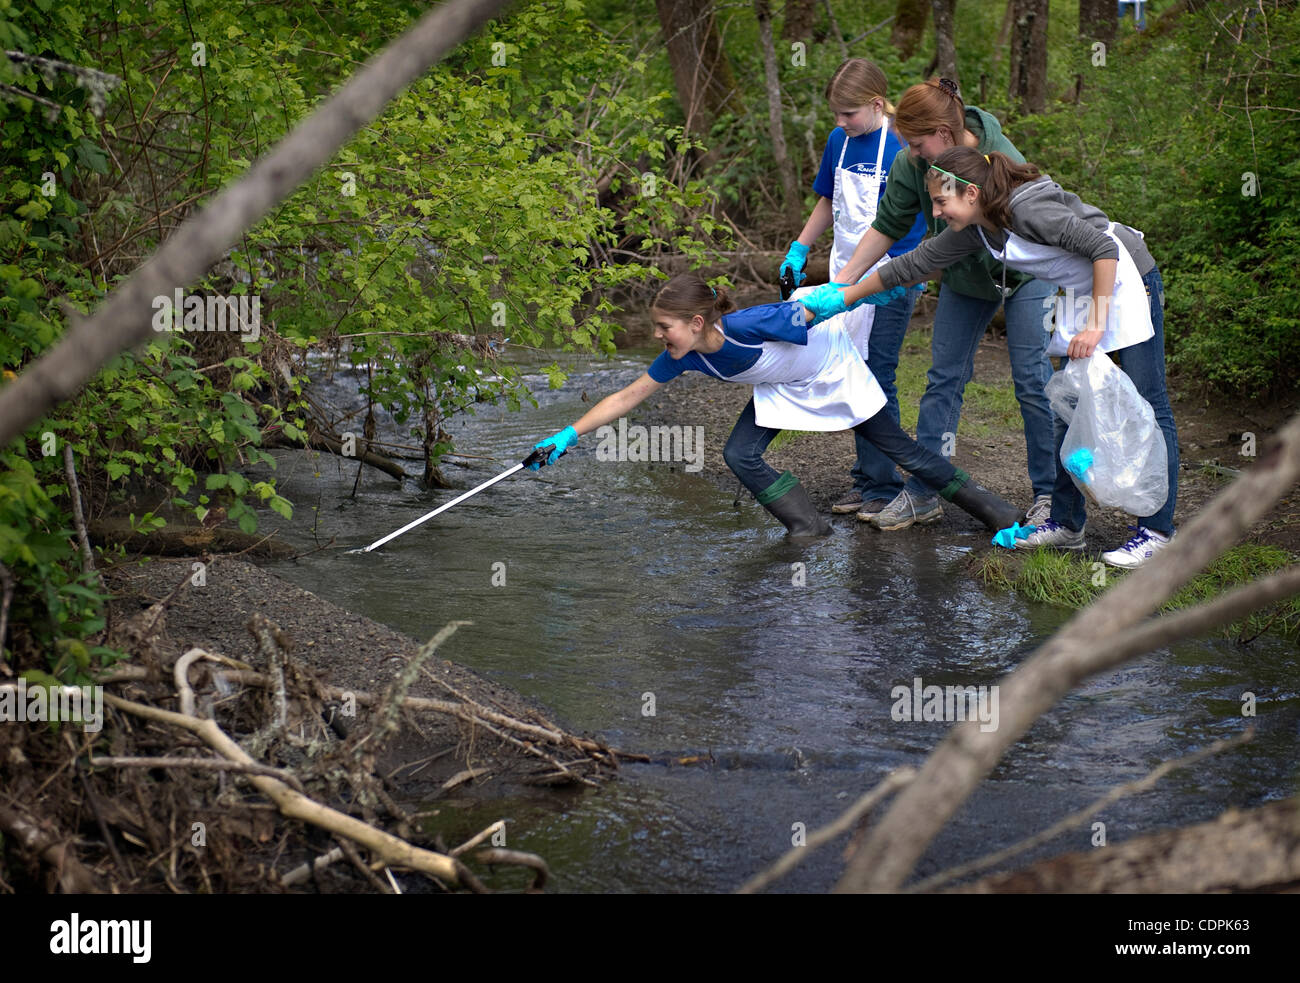 Apr. 27, 2011 - Roseburg, Oregon, U.S - JALEN ROBLES, 10, left, gets help from her sister KELSEY  ROBLES , 12, friend ALEXA LIGON , 10, and her mother HEIDI ROBLES while reaching for a piece of trash in a creek during a community cleanup day at a Charles Gardiner Park in Roseburg. The park is the si Stock Photo